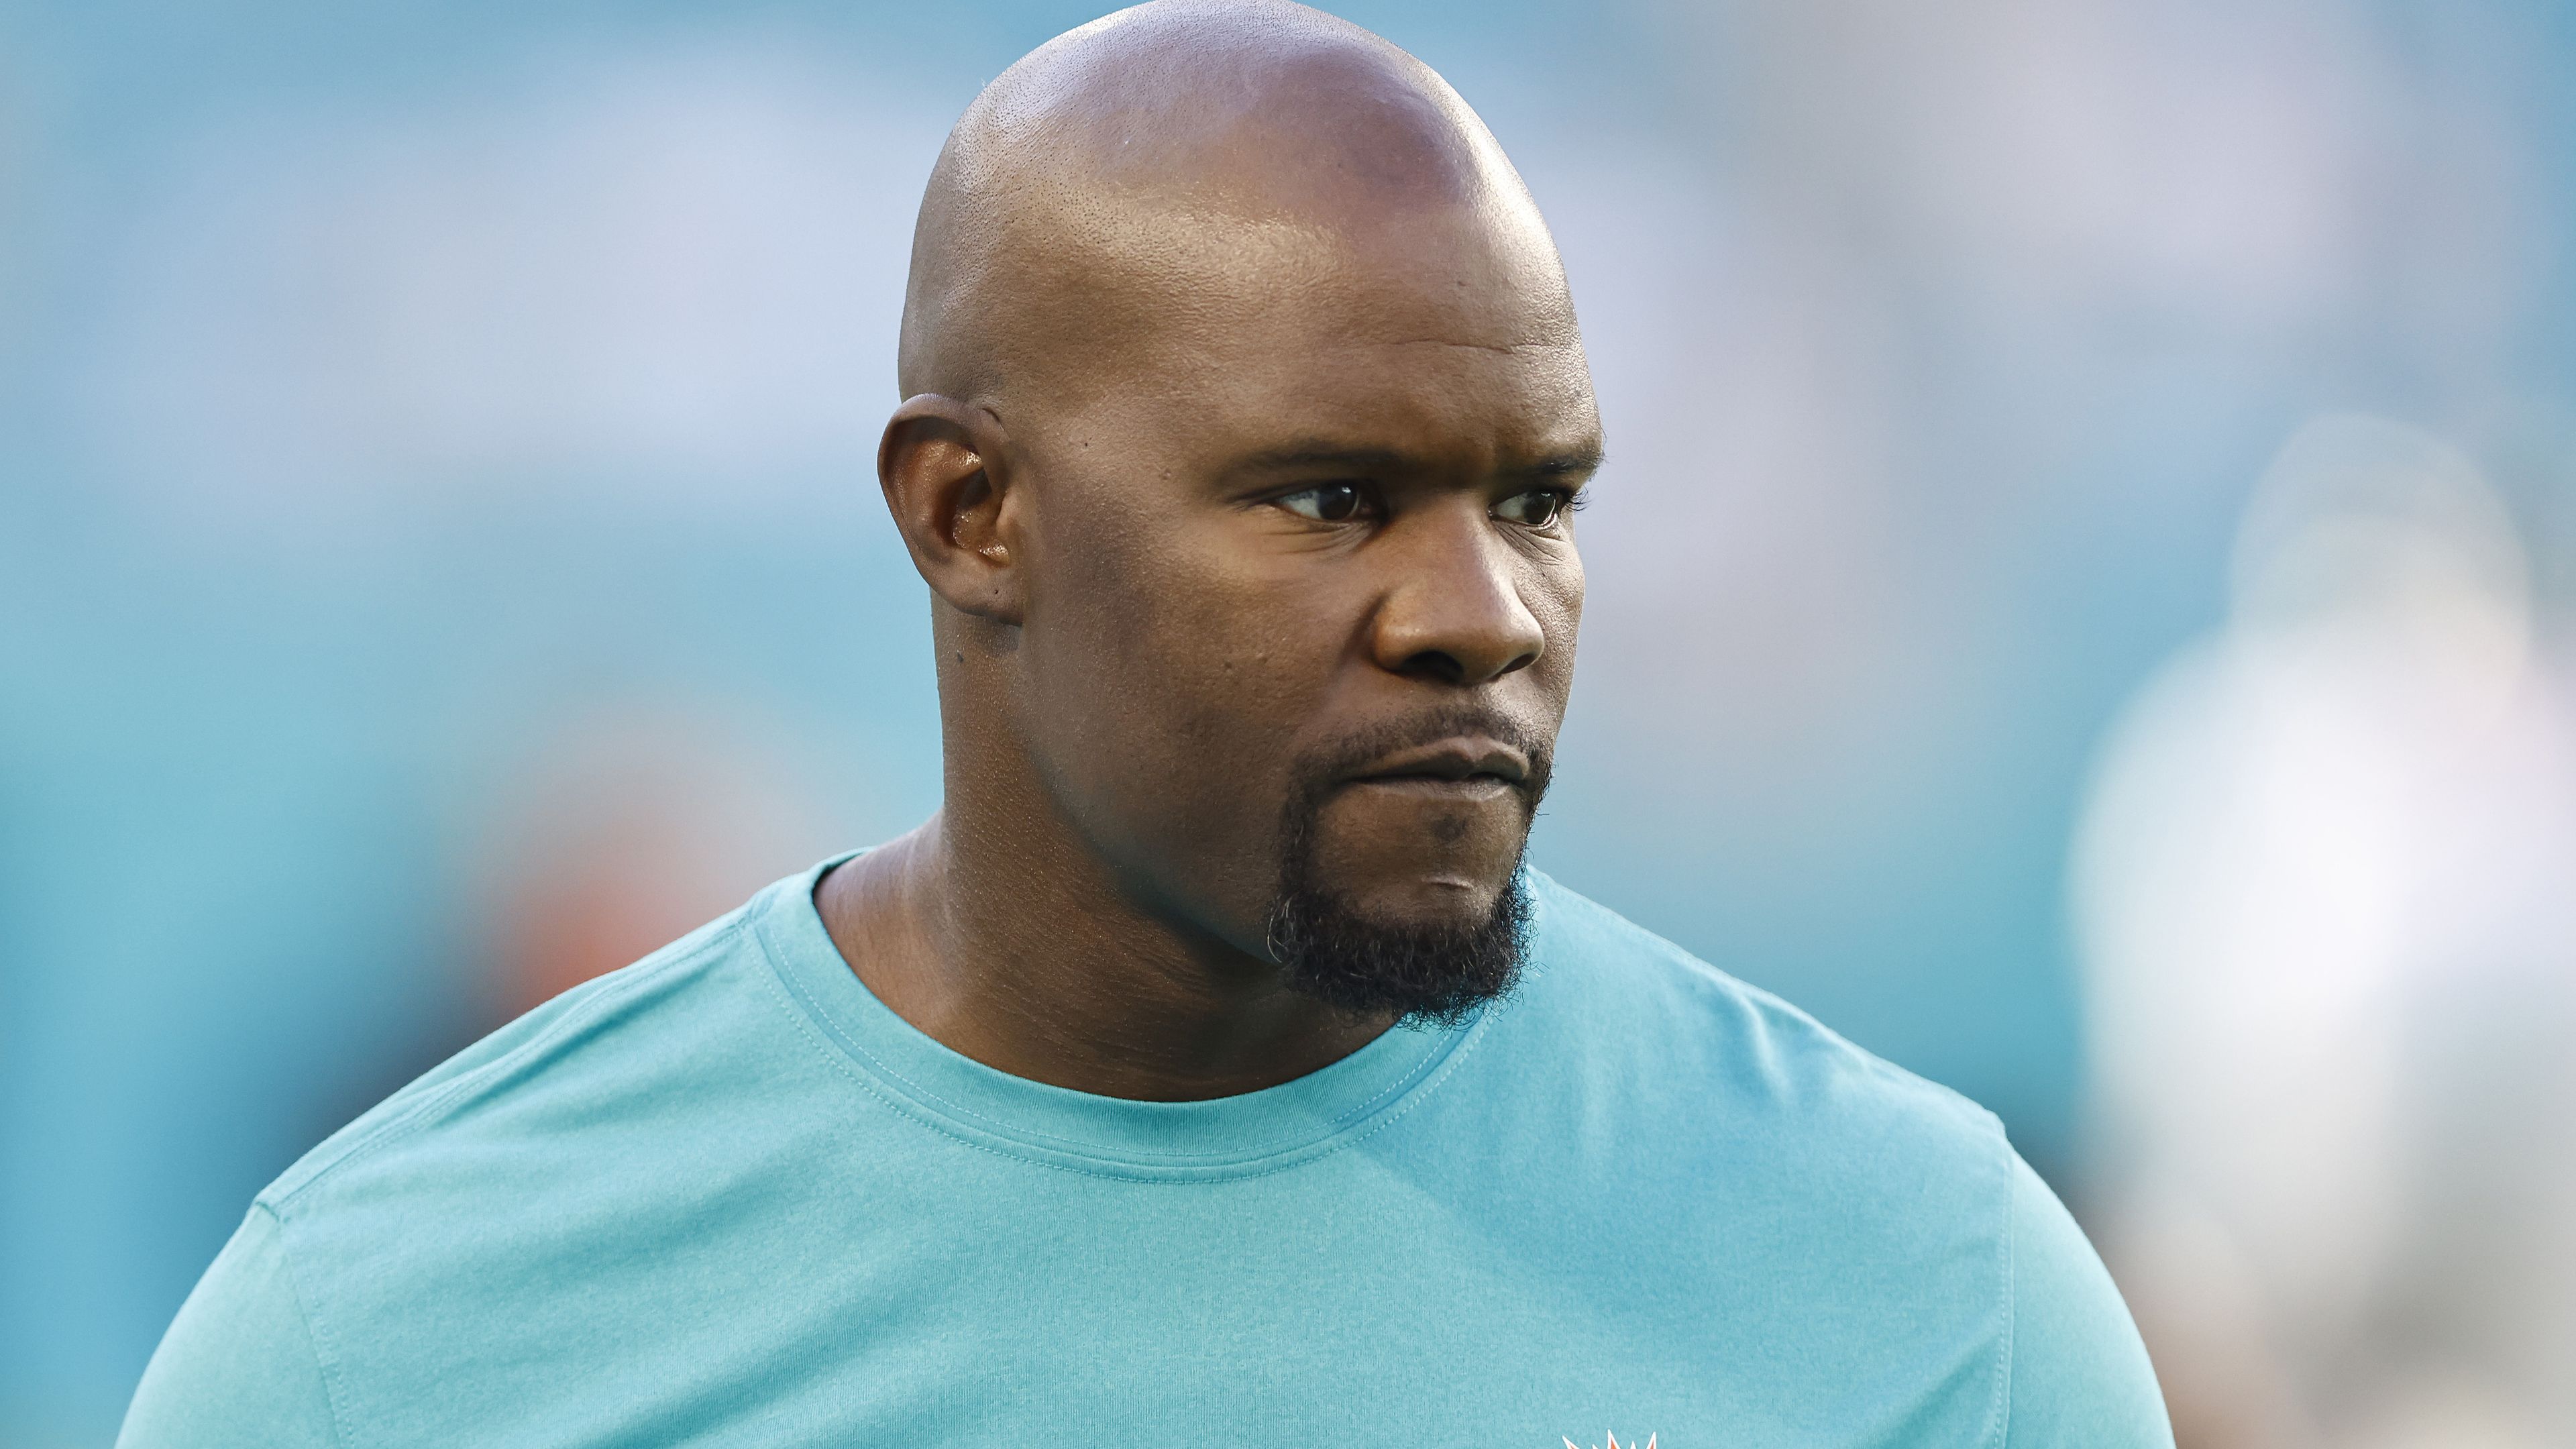 Former Dolphins coach Brian Flores says he won't drop lawsuit even if hired as coach